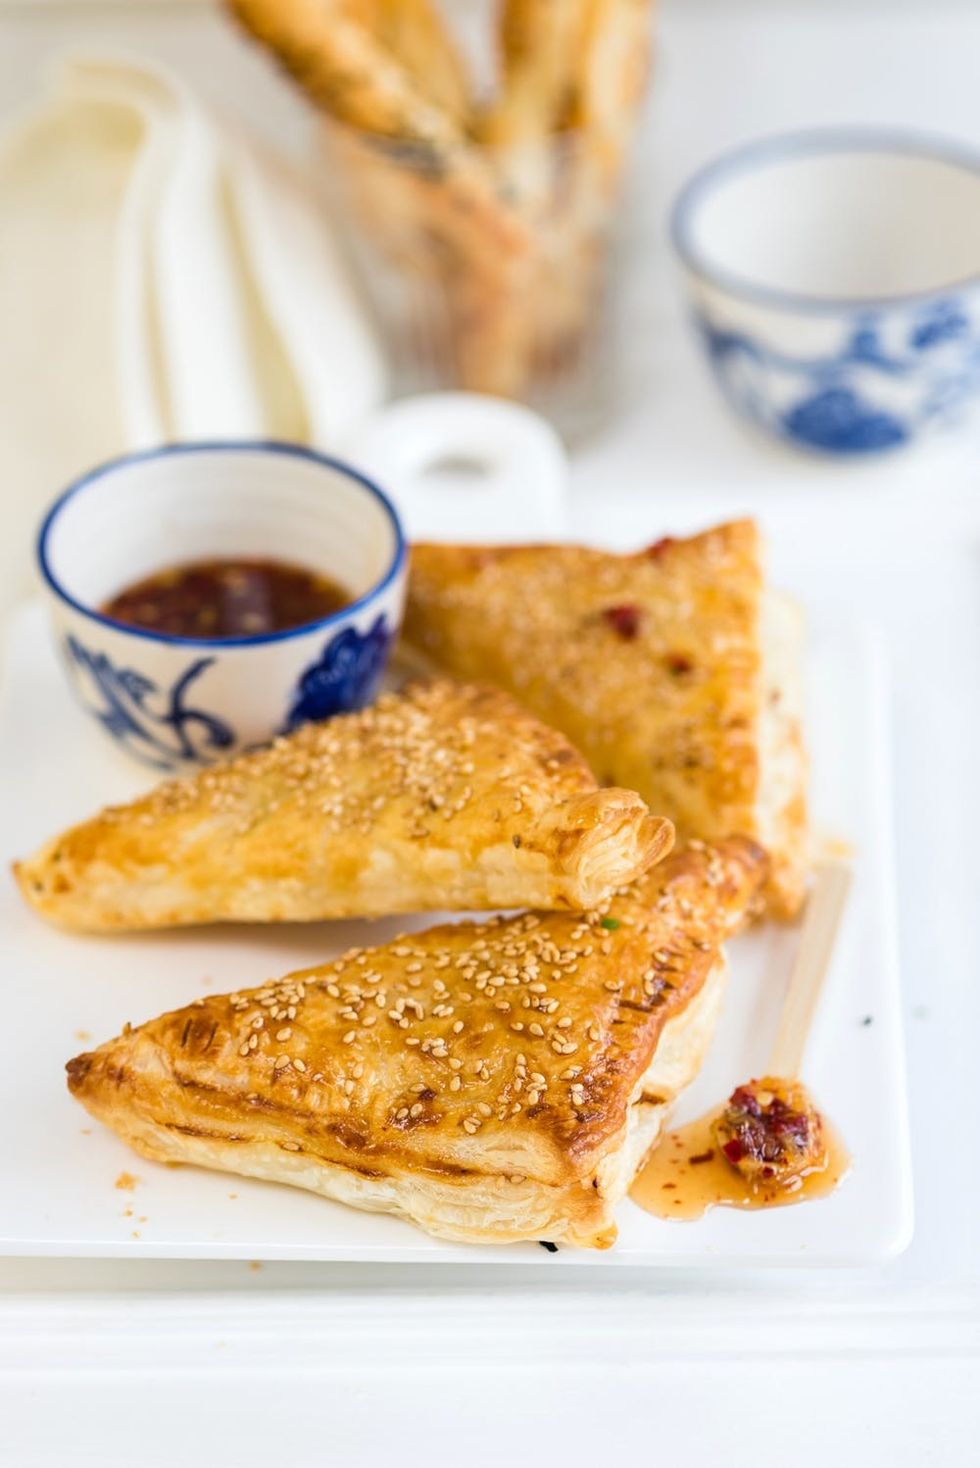  The Oscar for the tastiest app goes to... sesame shrimp puffs with homemade sweet chilli sauce! Make sure to make this quick and delicious recipe to serve at your Oscar party.